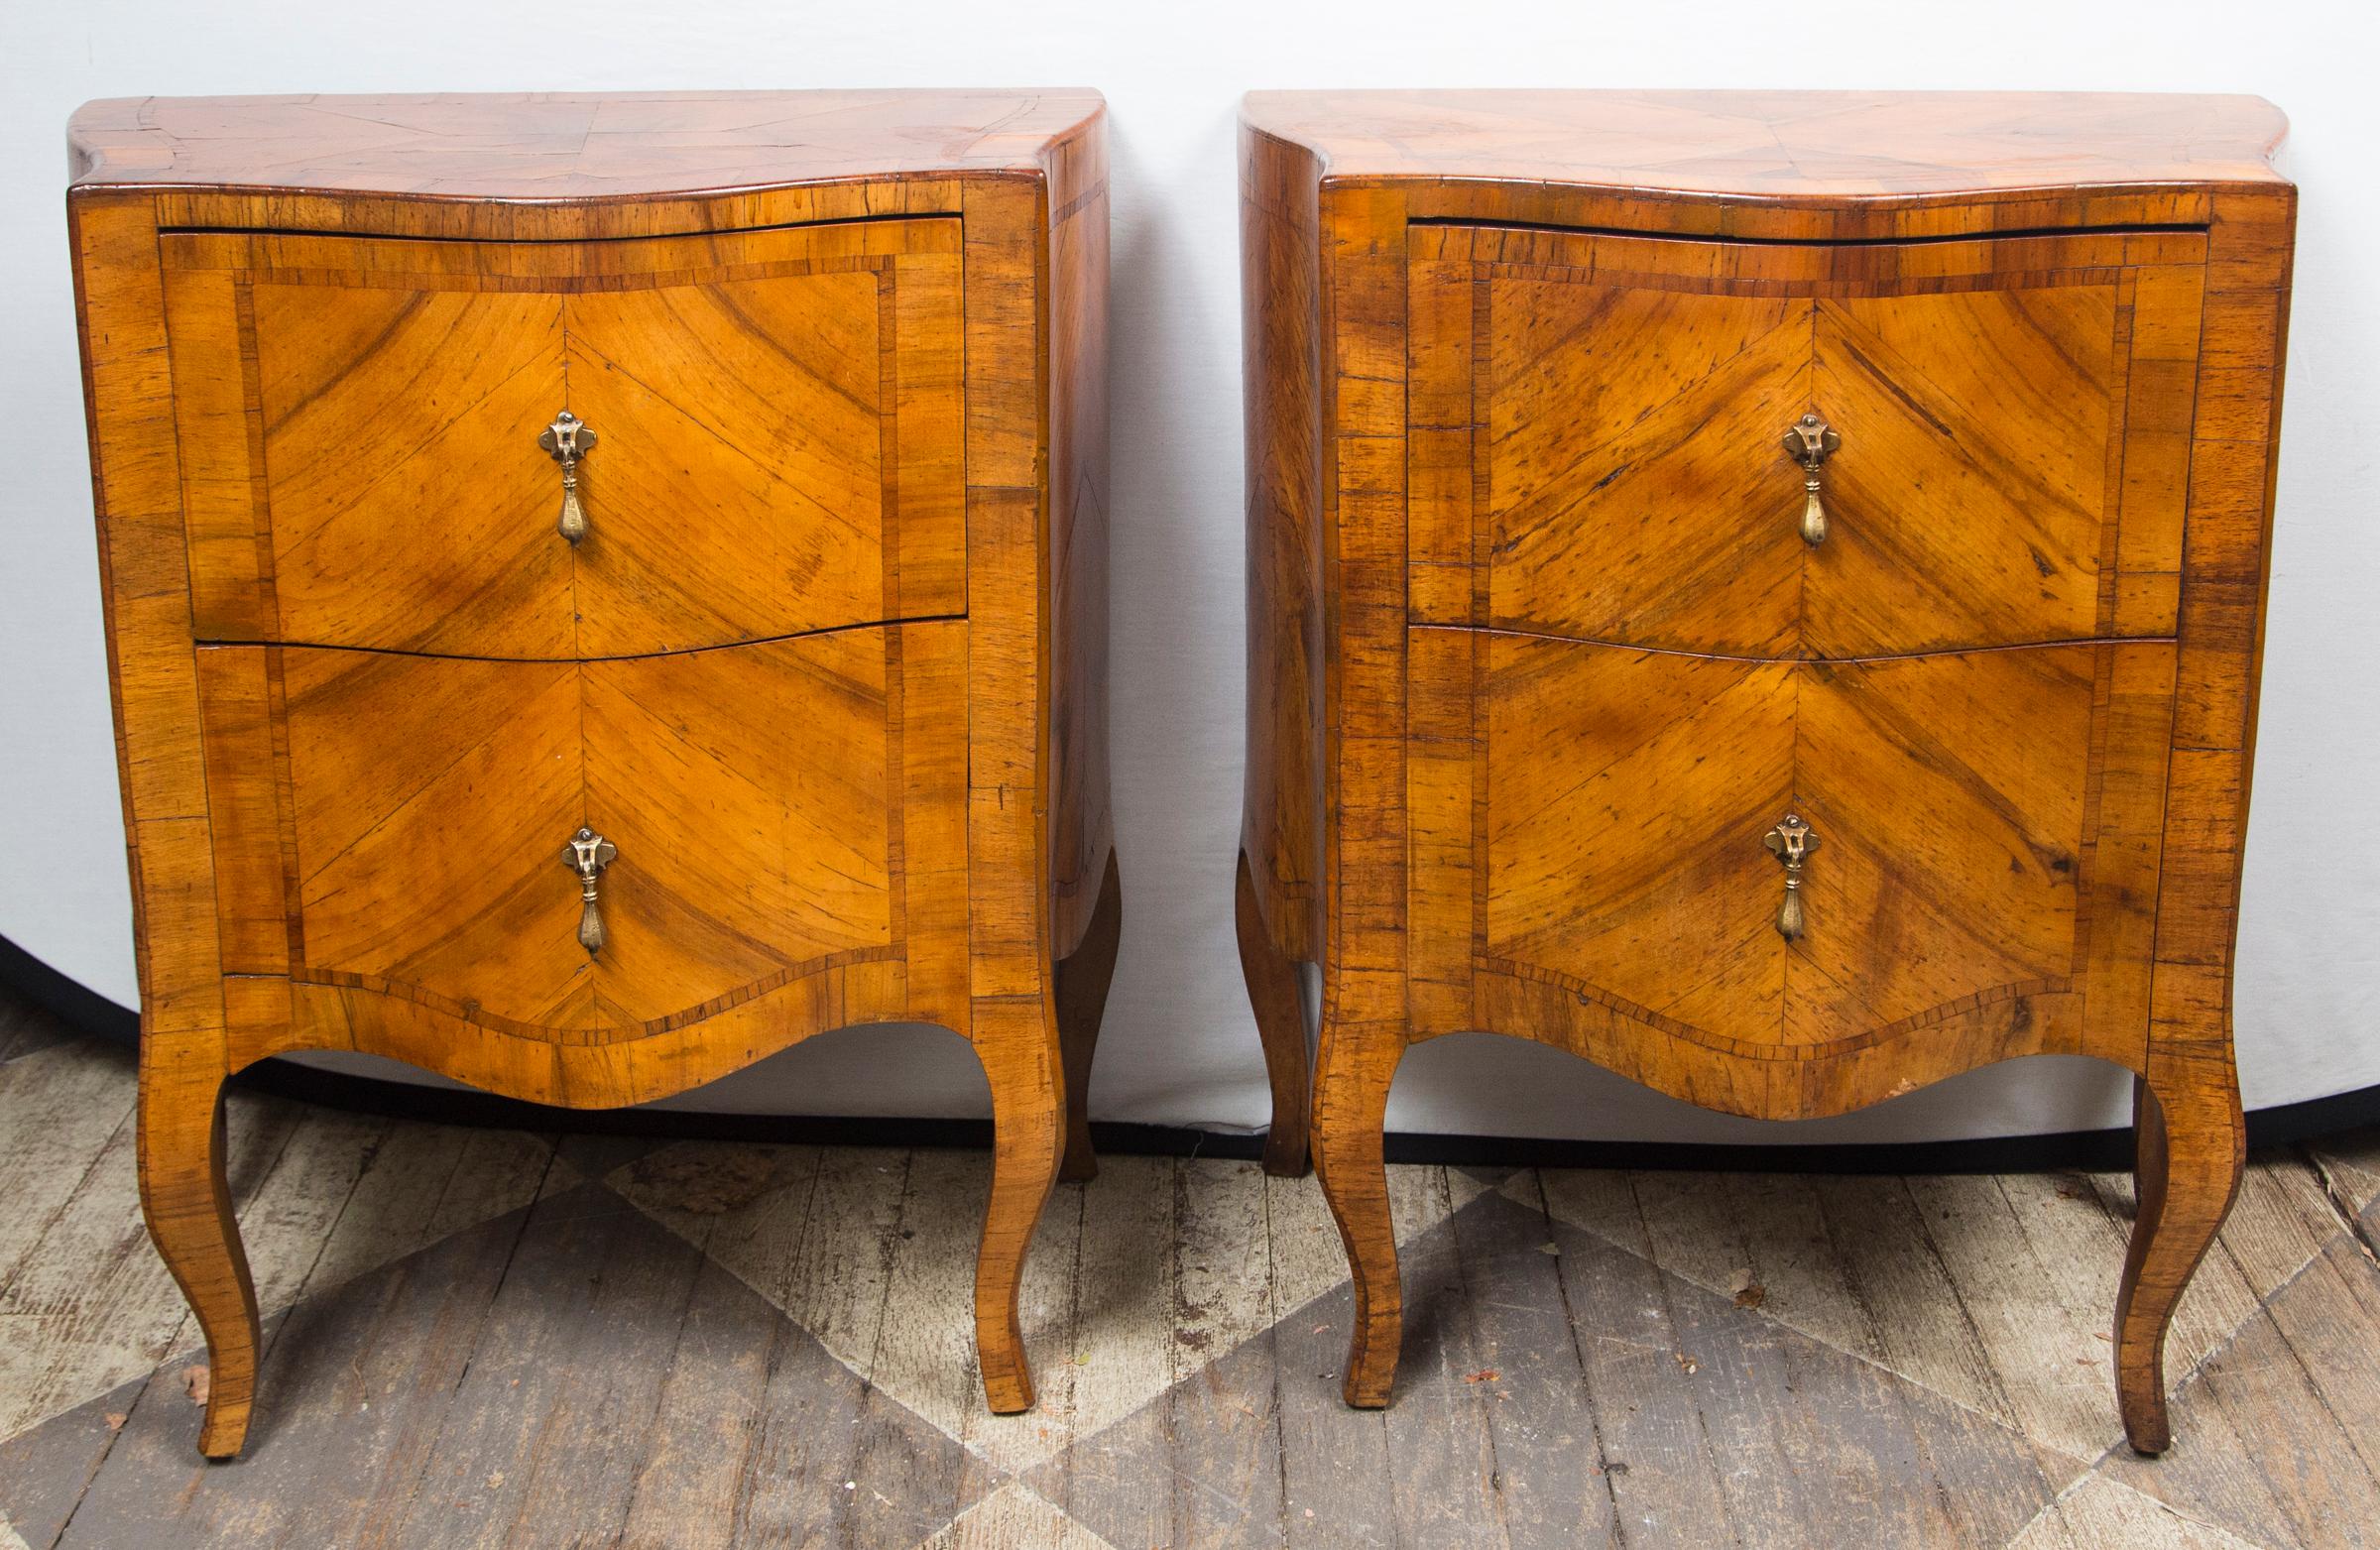 Pair of matching fruitwood (possibly olivewood) parquetry veneers. Each with 2 drawers. Shaped front, rococo legs. Each drawer is 7 inches deep. Drop pulls.